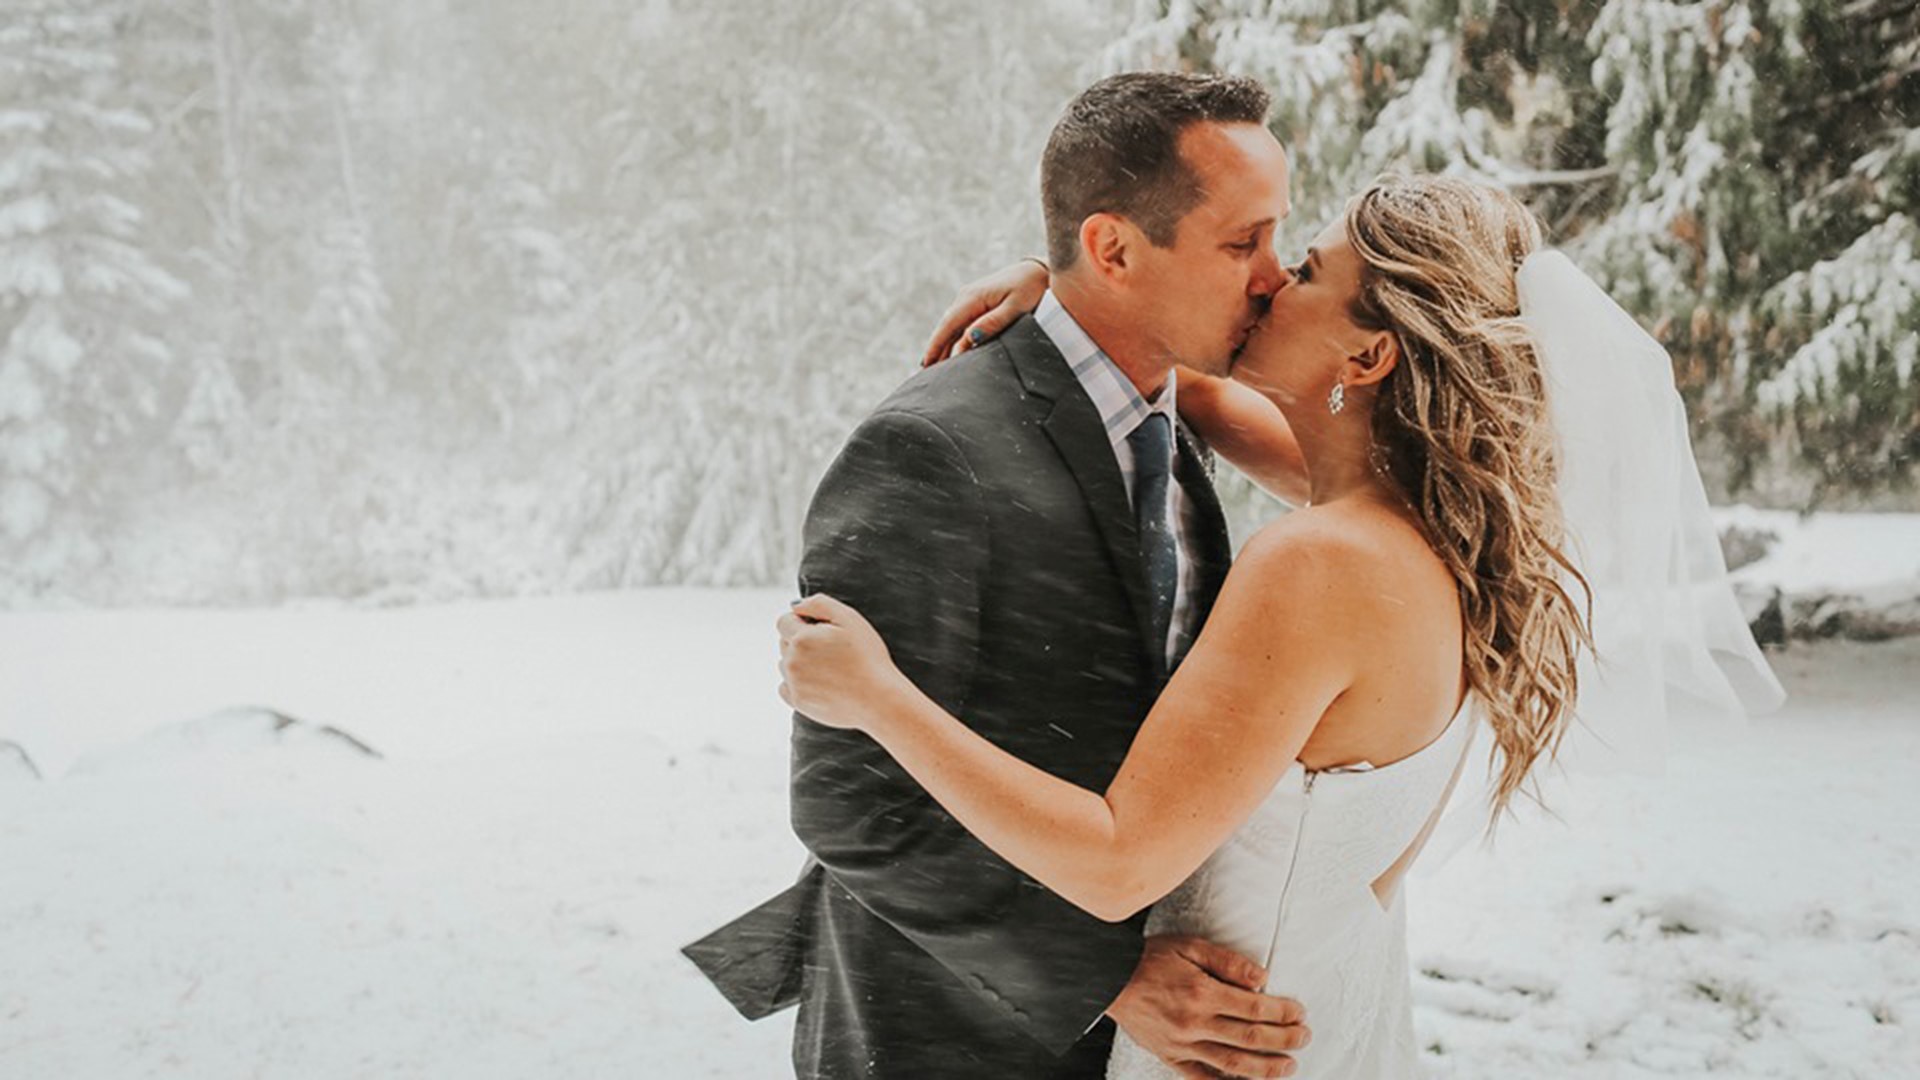 It's not supposed to dump more than a foot of snow in September in Spokane, Wash., but it did for Sean and Brittany Tuohy's wedding.